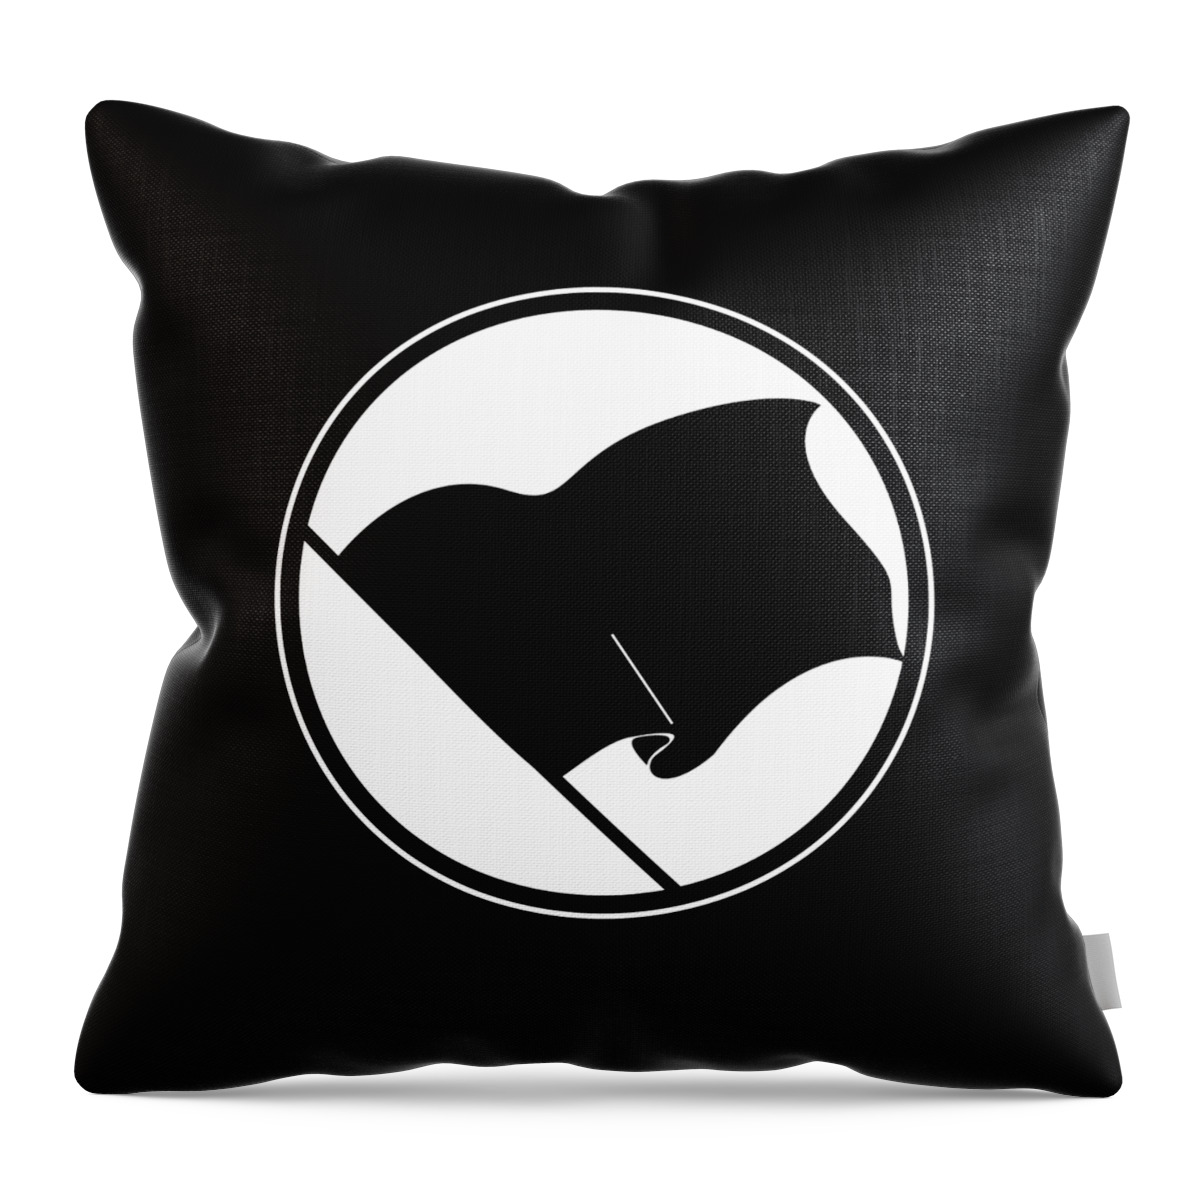 Anarchists Throw Pillow featuring the digital art The Black Flag. Traditional anarchist symbol. by Tom Hill